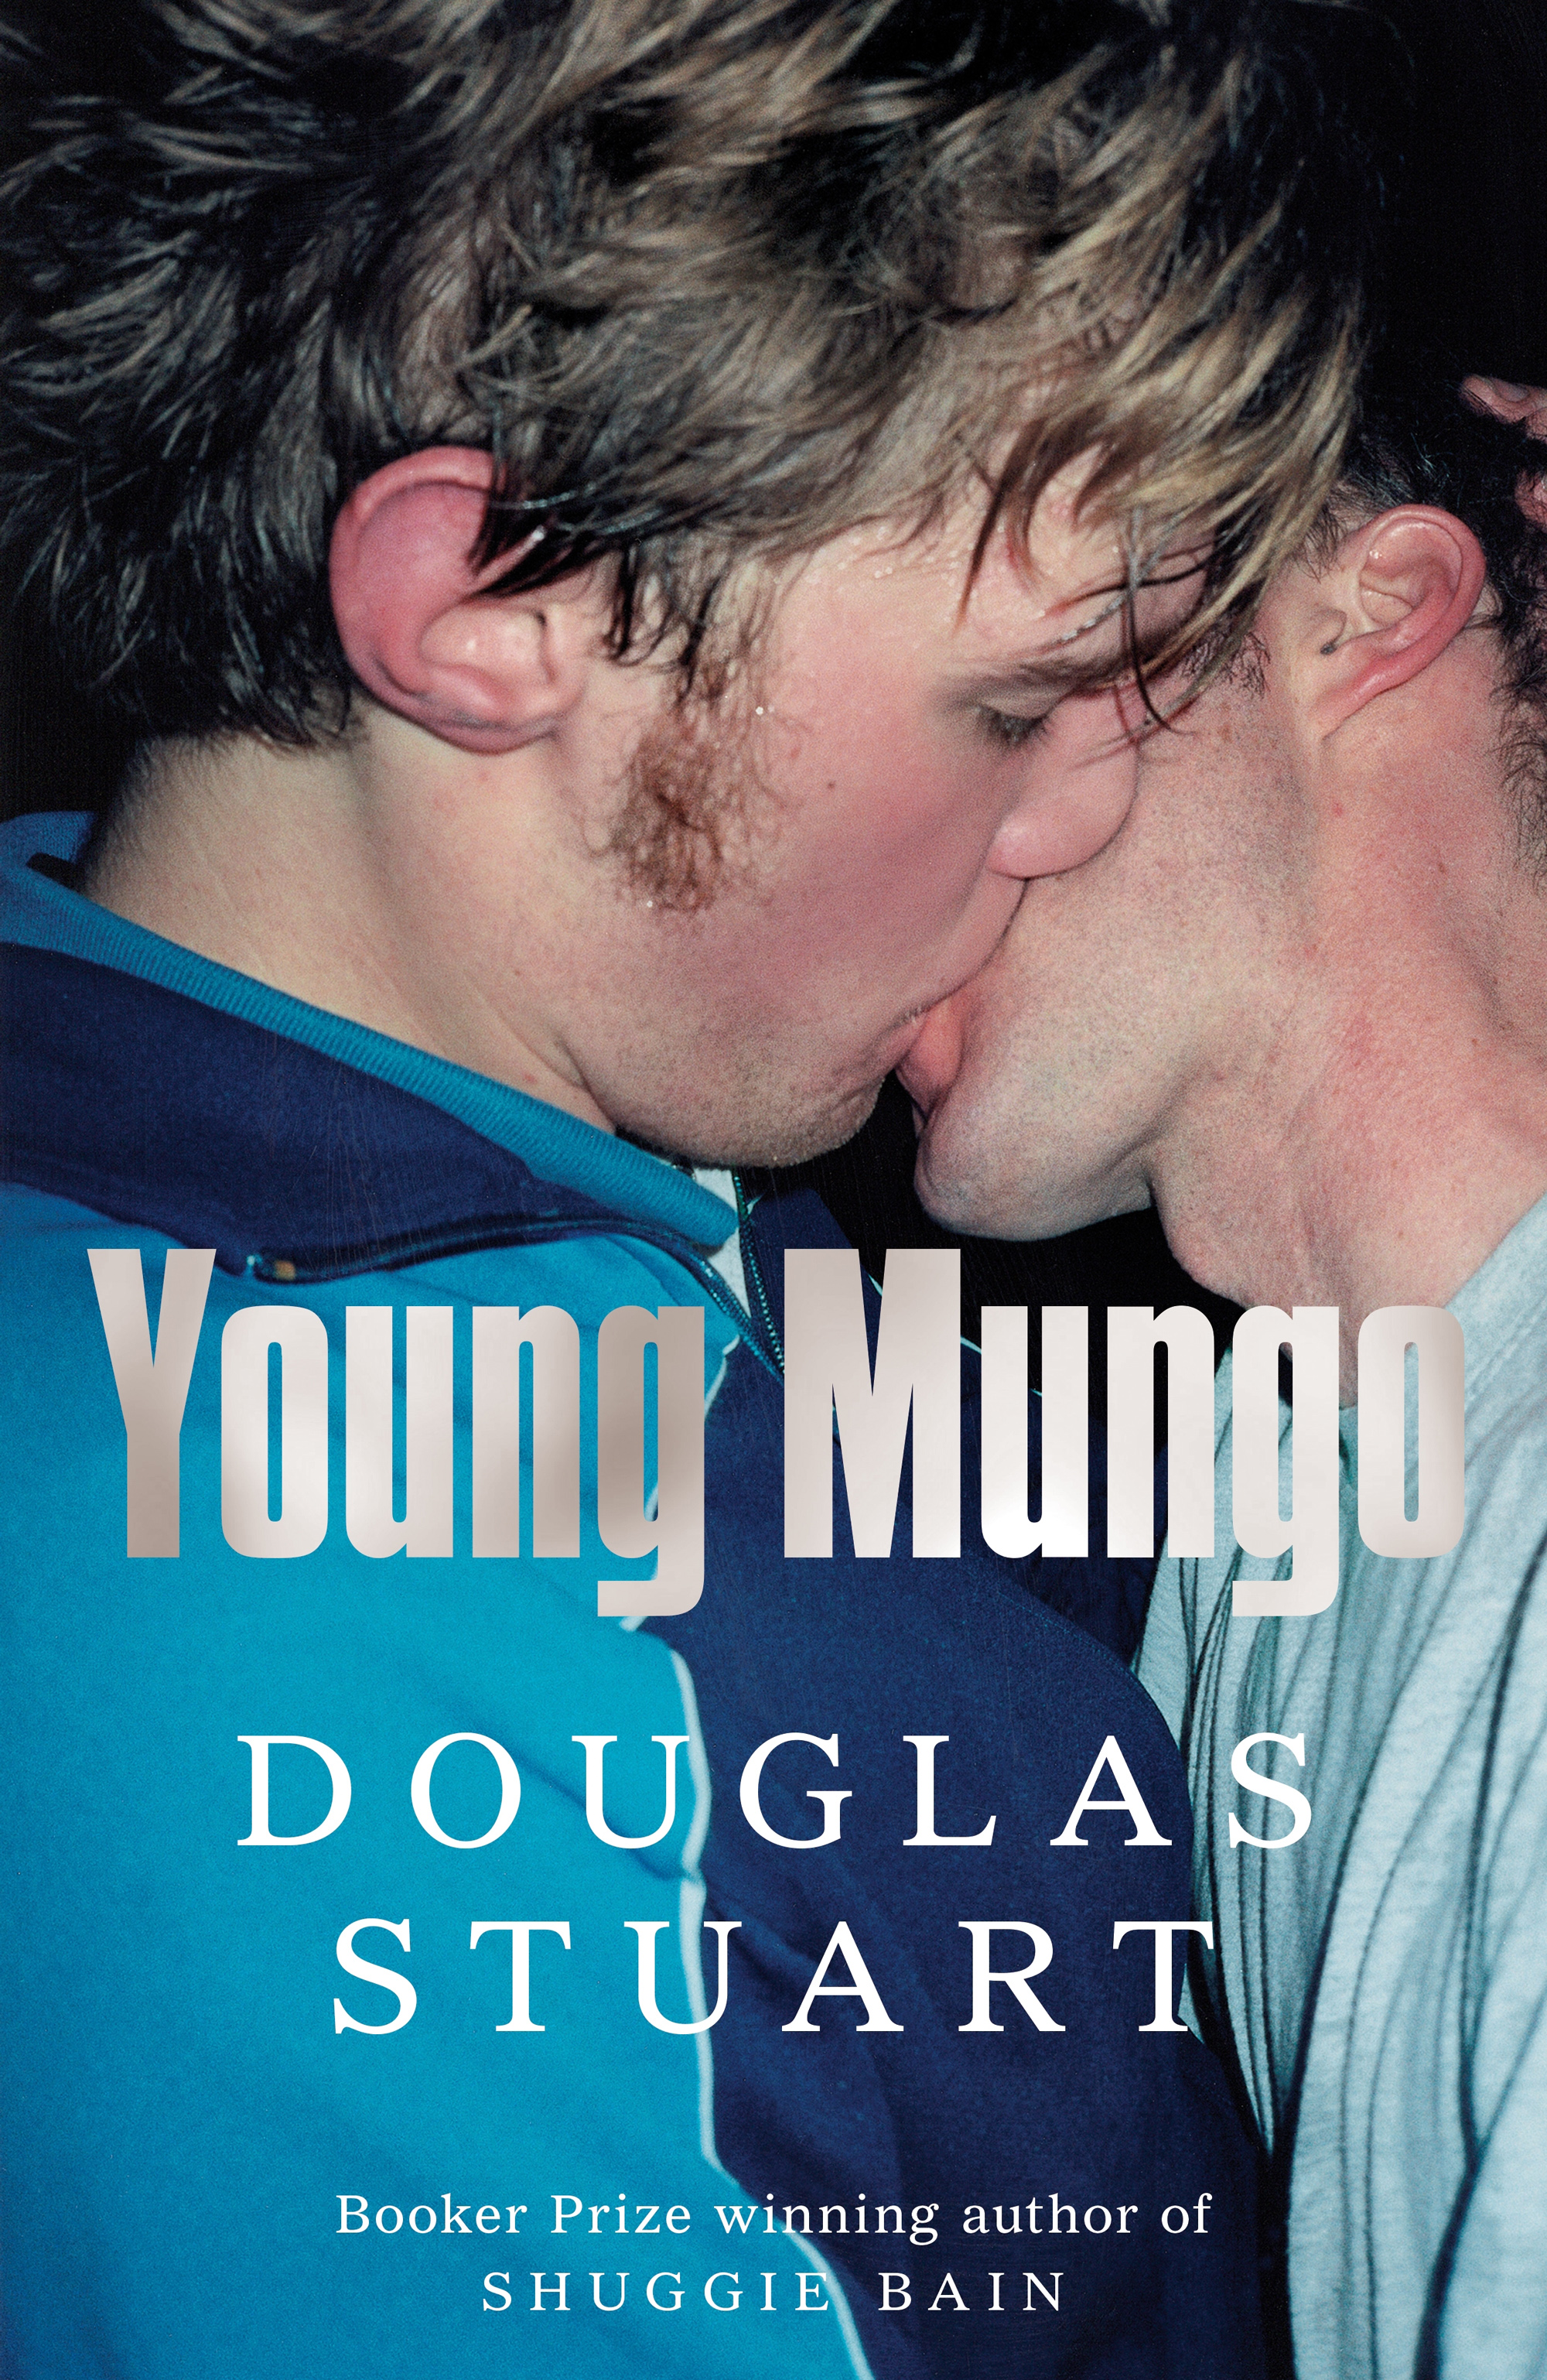 Two men dressed in shades of blue kiss each other passionately on the cover of this book. 